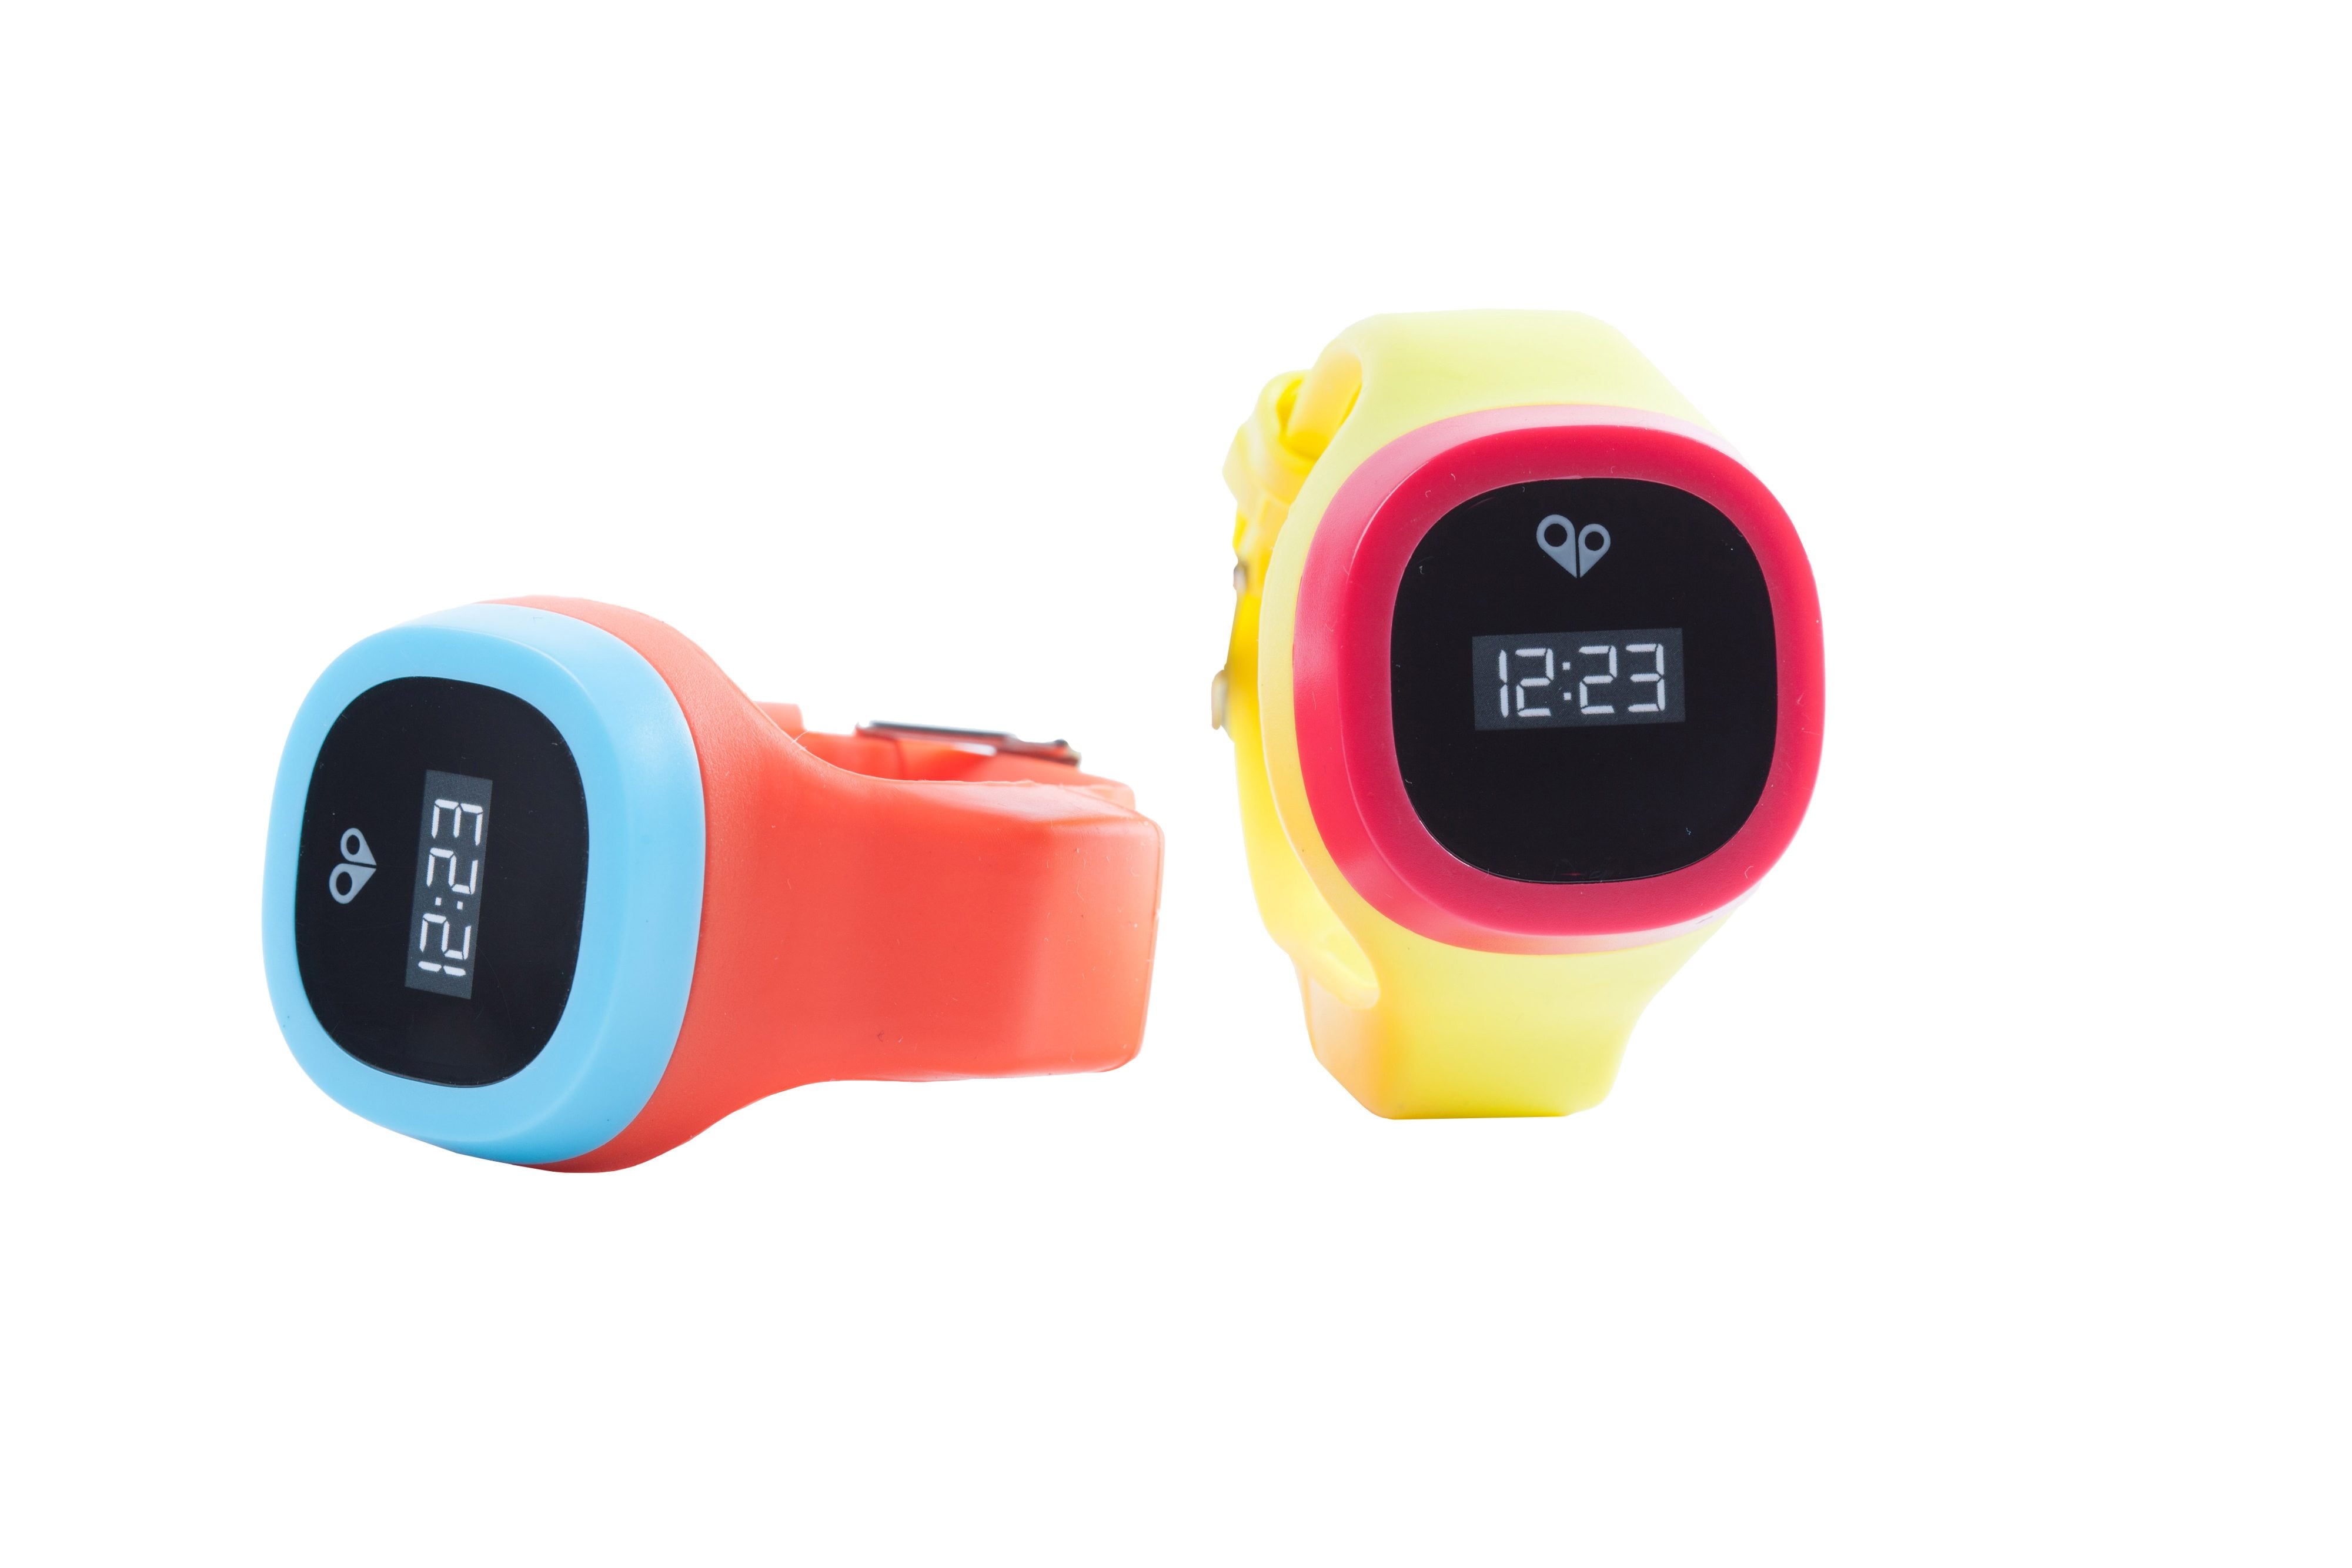 Rapid7 researchers recently found that the HereO GPS smartwatch, which allows parents to track their child&#039;s location, failed to safeguard children&#039;s information.